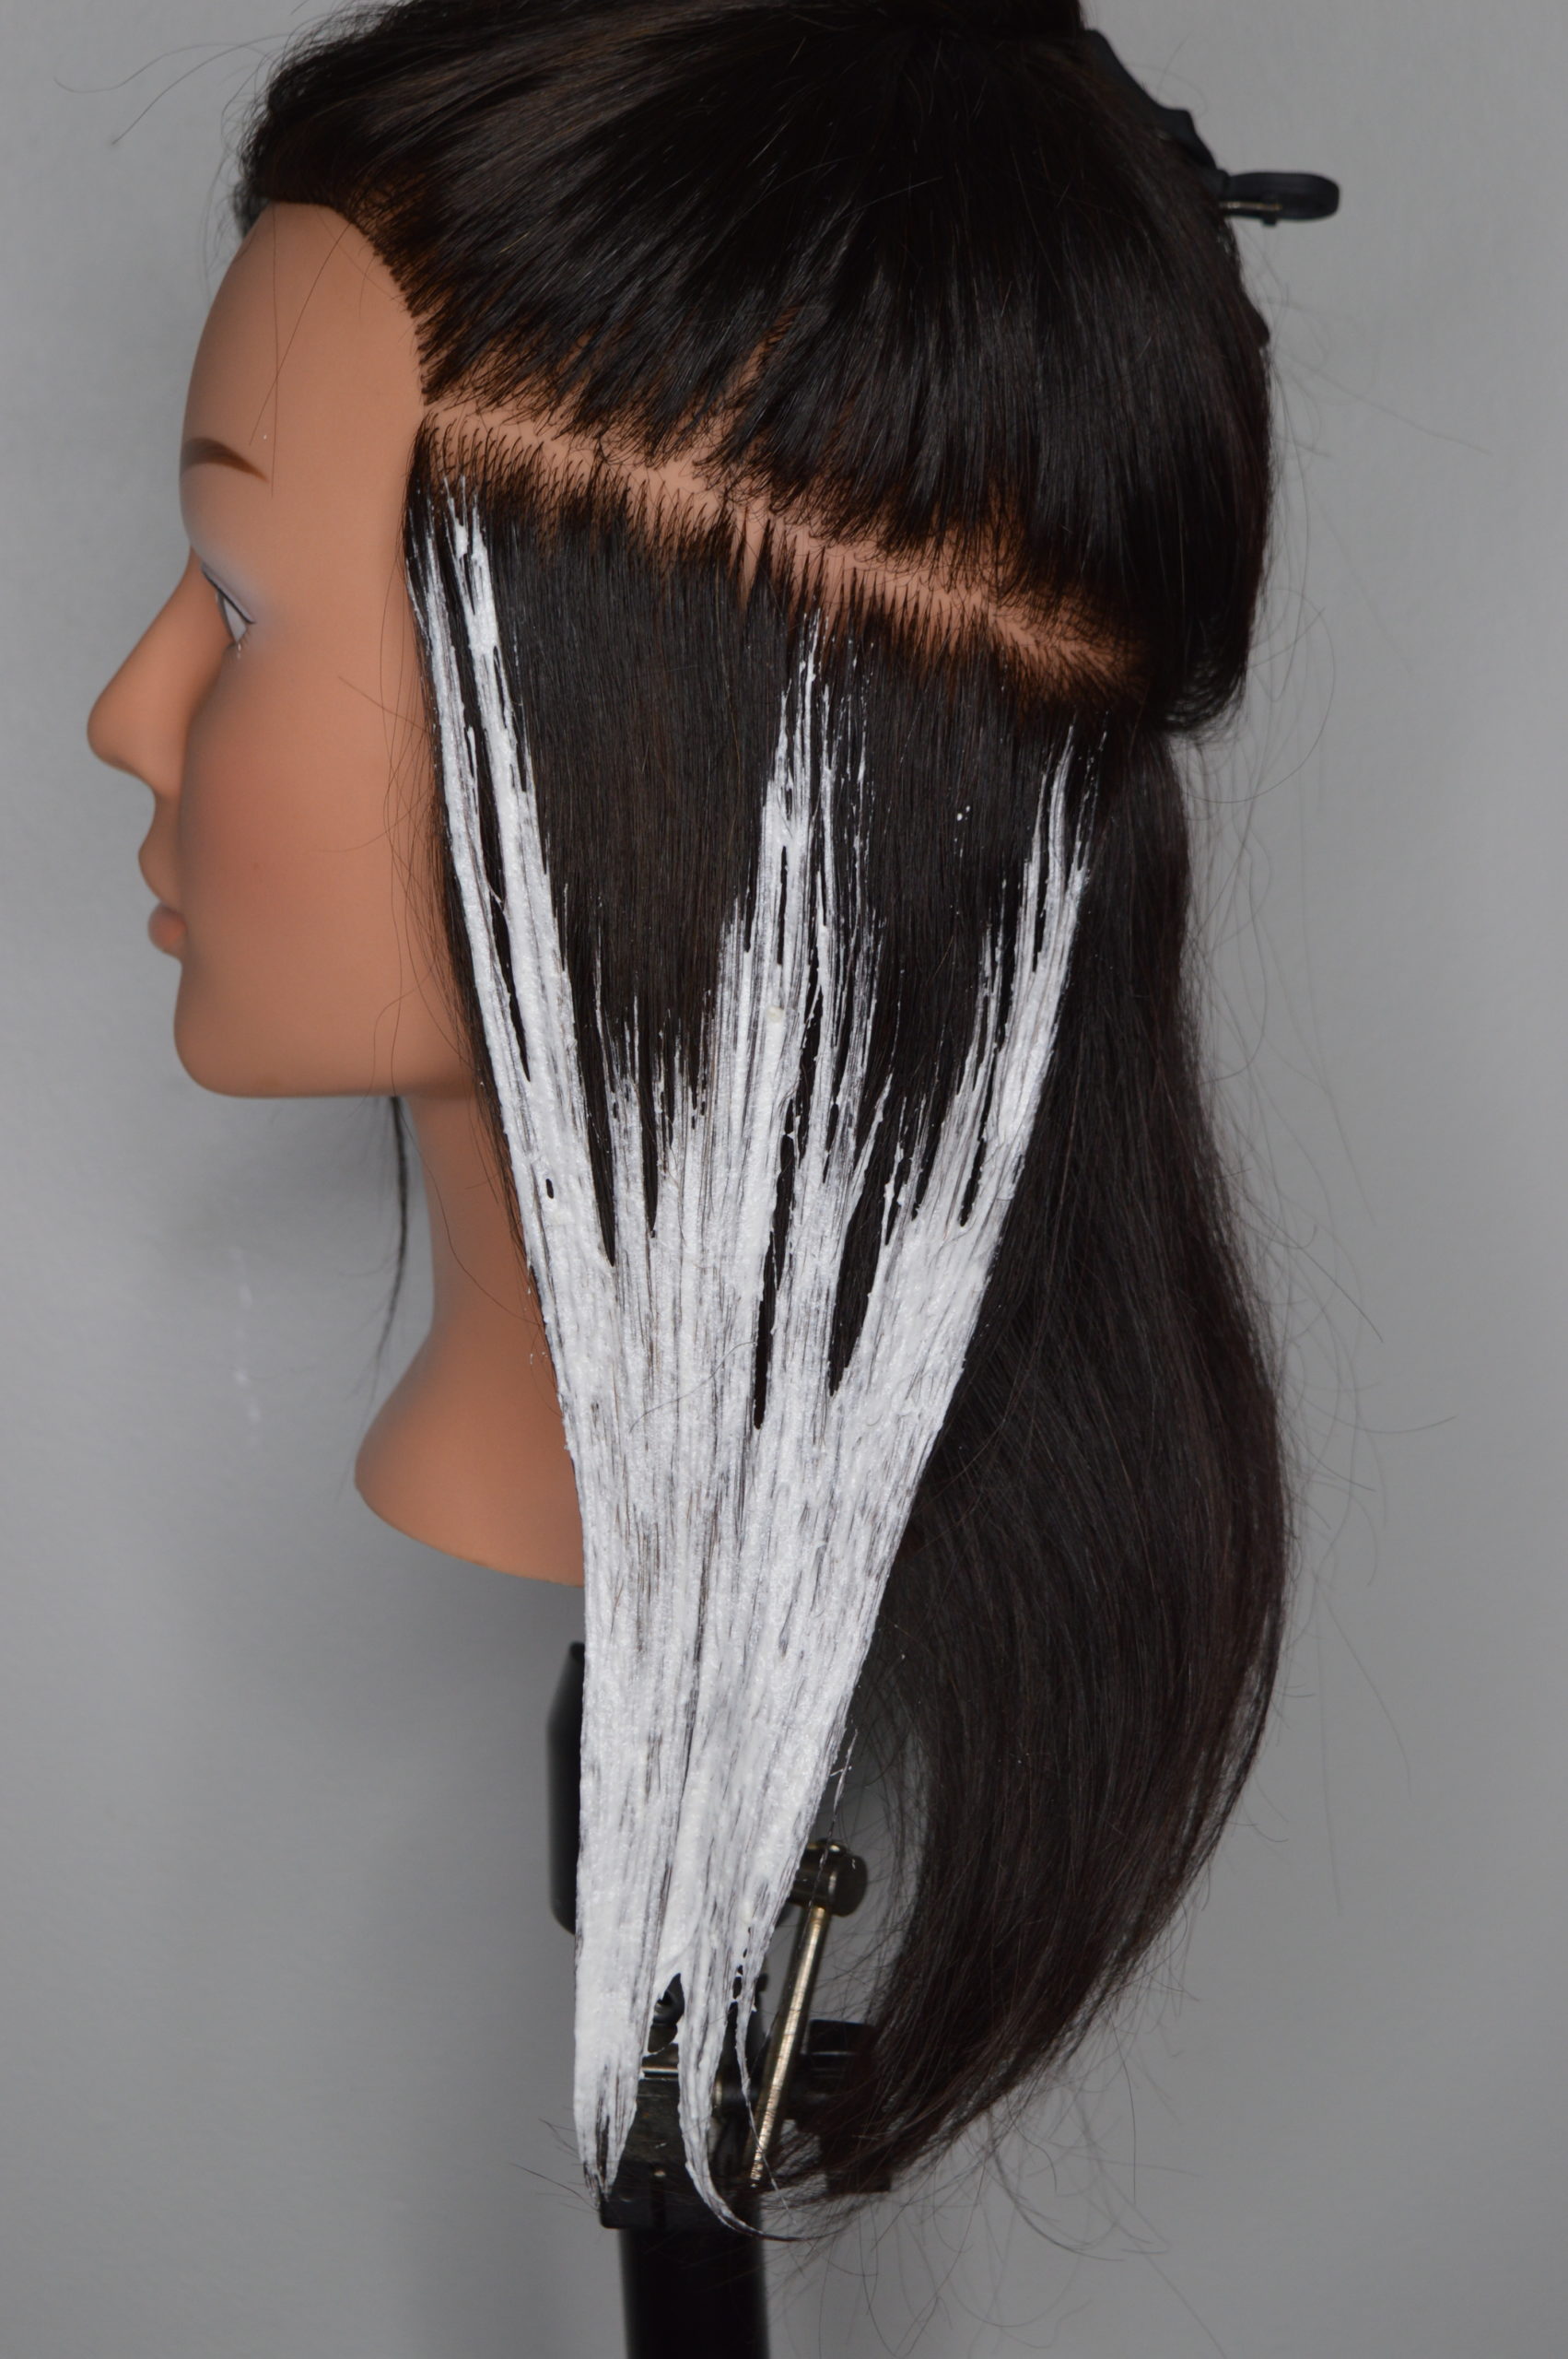 Lightener is applied to a large section of hair to form a W shape.